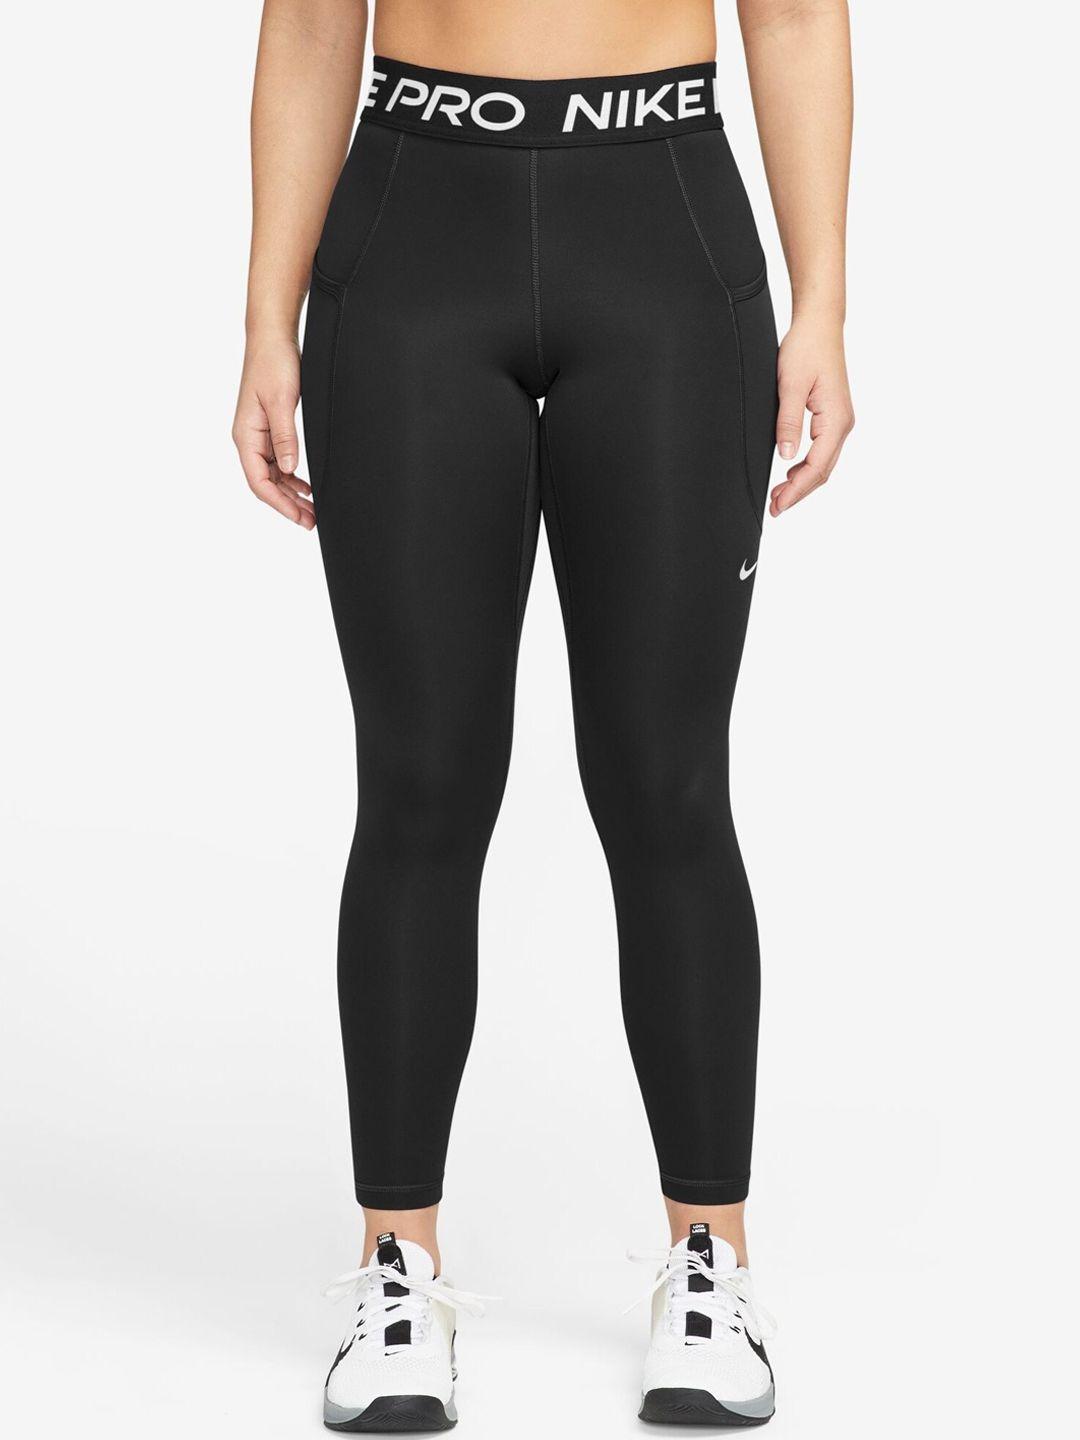 nike-pro-365-women-slim-fit-mid-rise-7/8-pocket-ankle-length-gym-tights